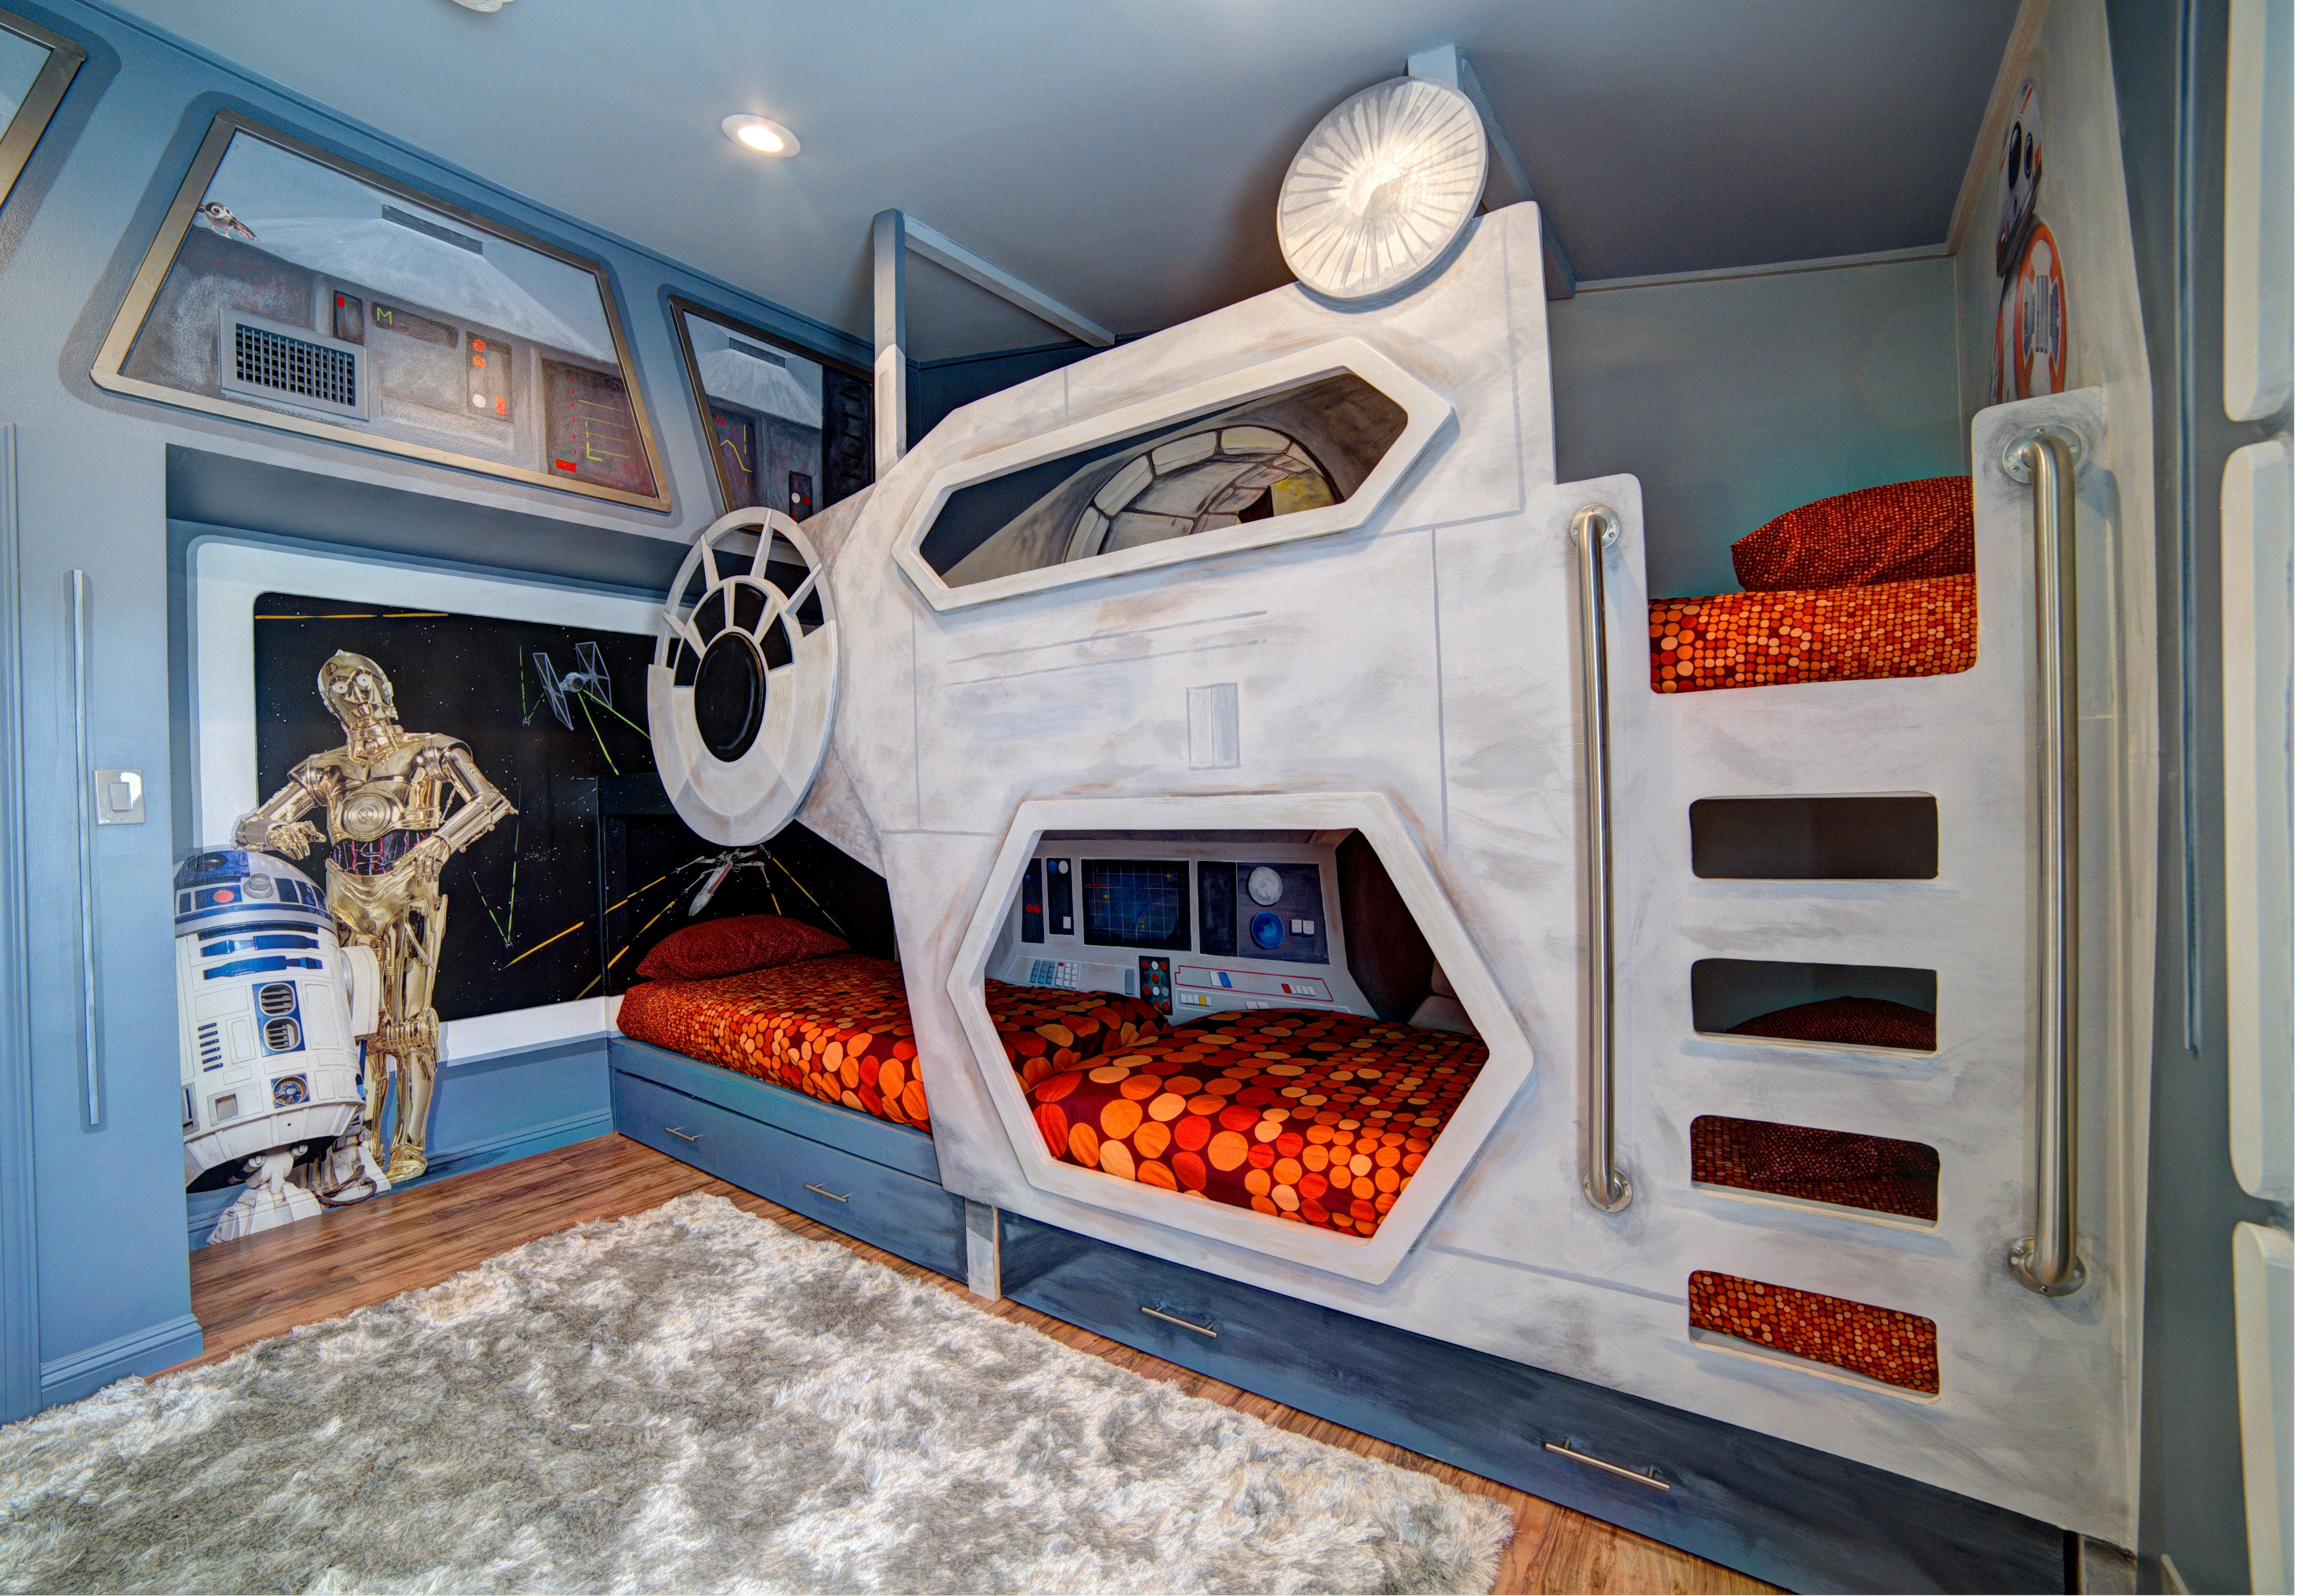 A picture of a bedroom in the California house decorated with Star Wars memorabilia